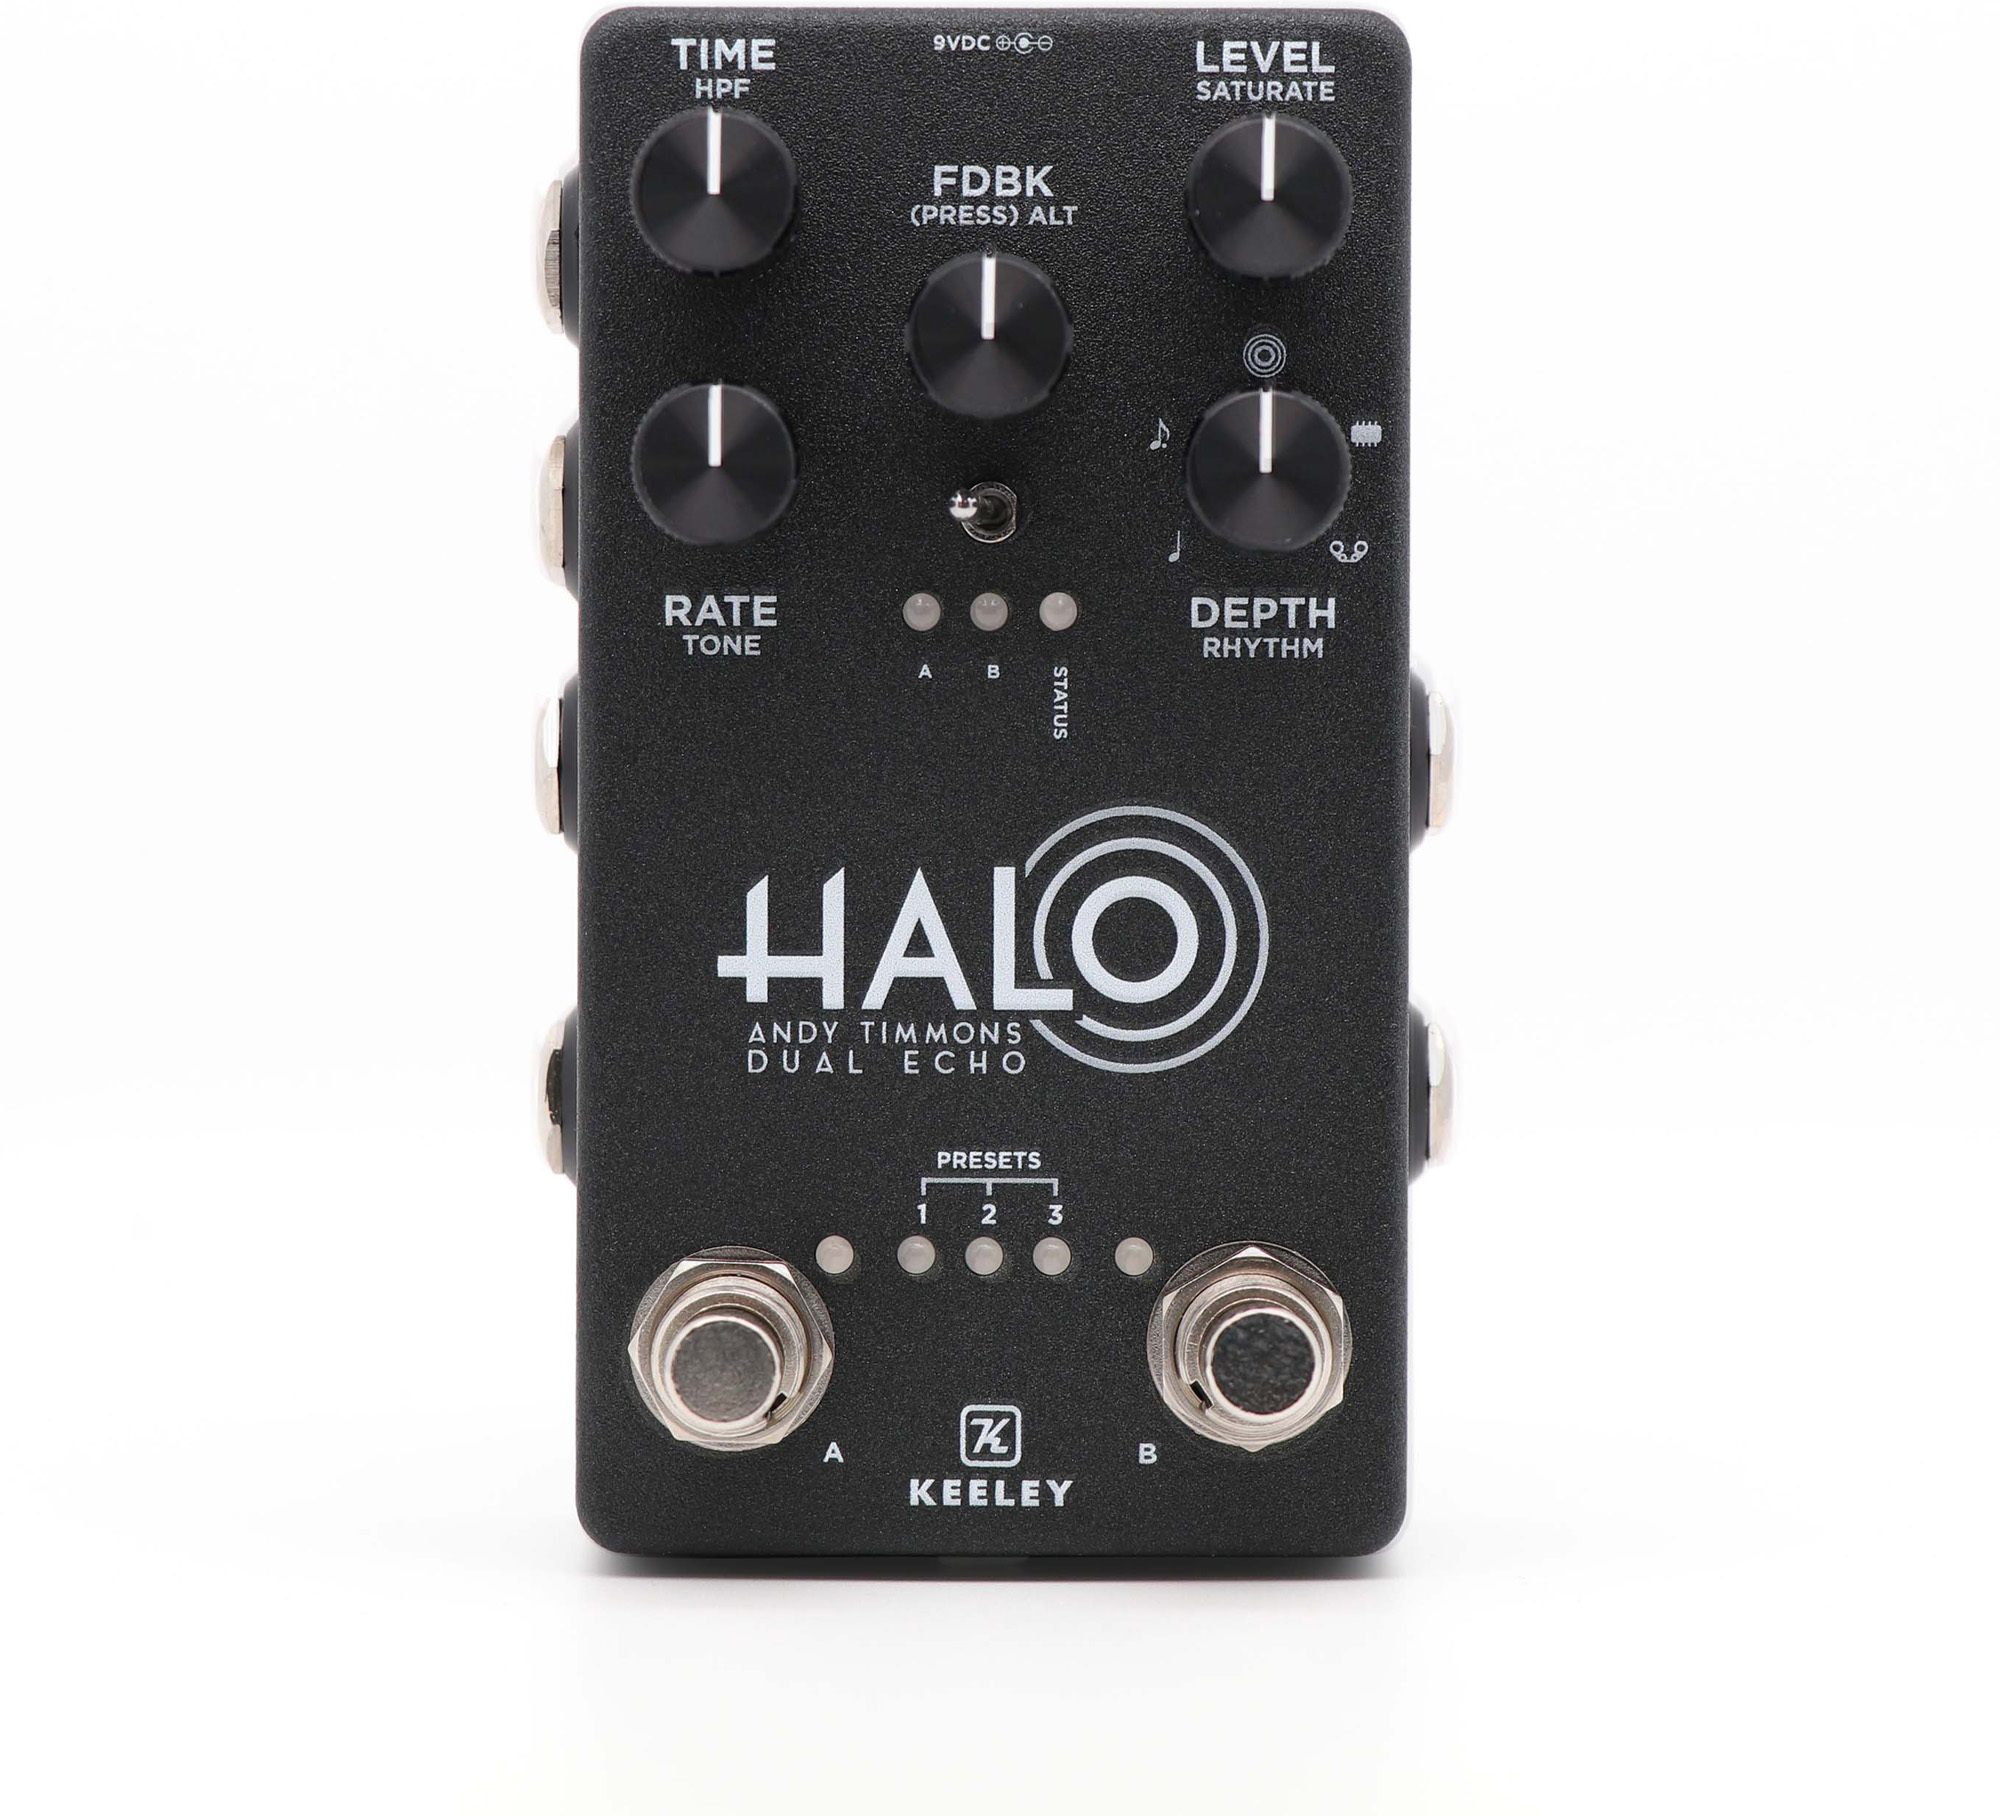 Keeley  Electronics Halo Dual Echo Andy Timmons Signature - Reverb/Delay/Echo Effektpedal - Main picture